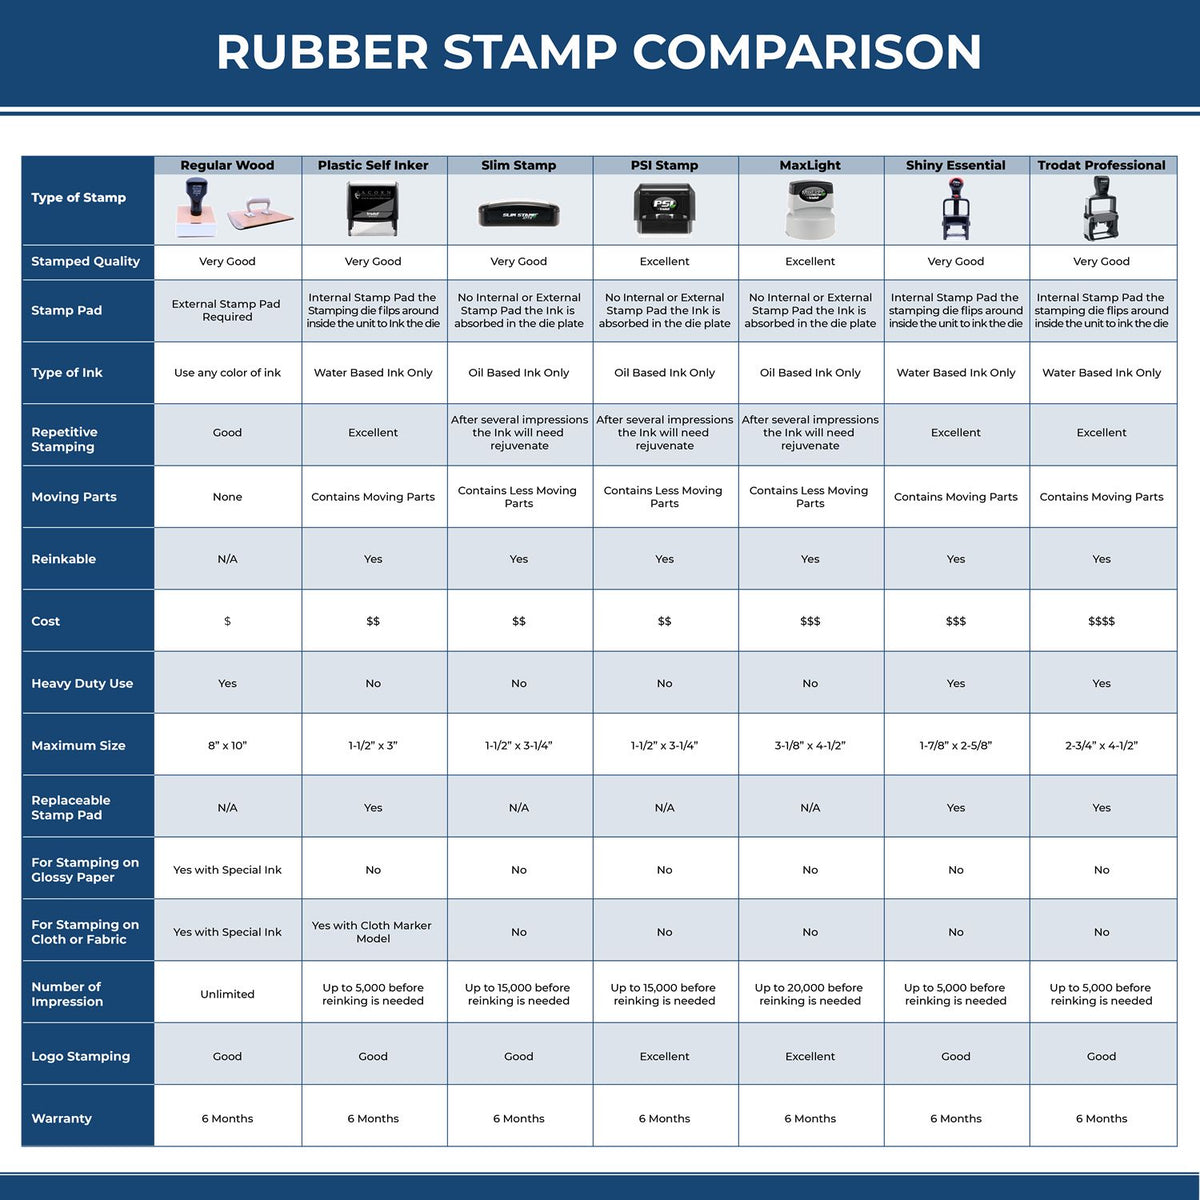 Large Self-Inking Paid with Checkmark Stamp 5651S Rubber Stamp Comparison